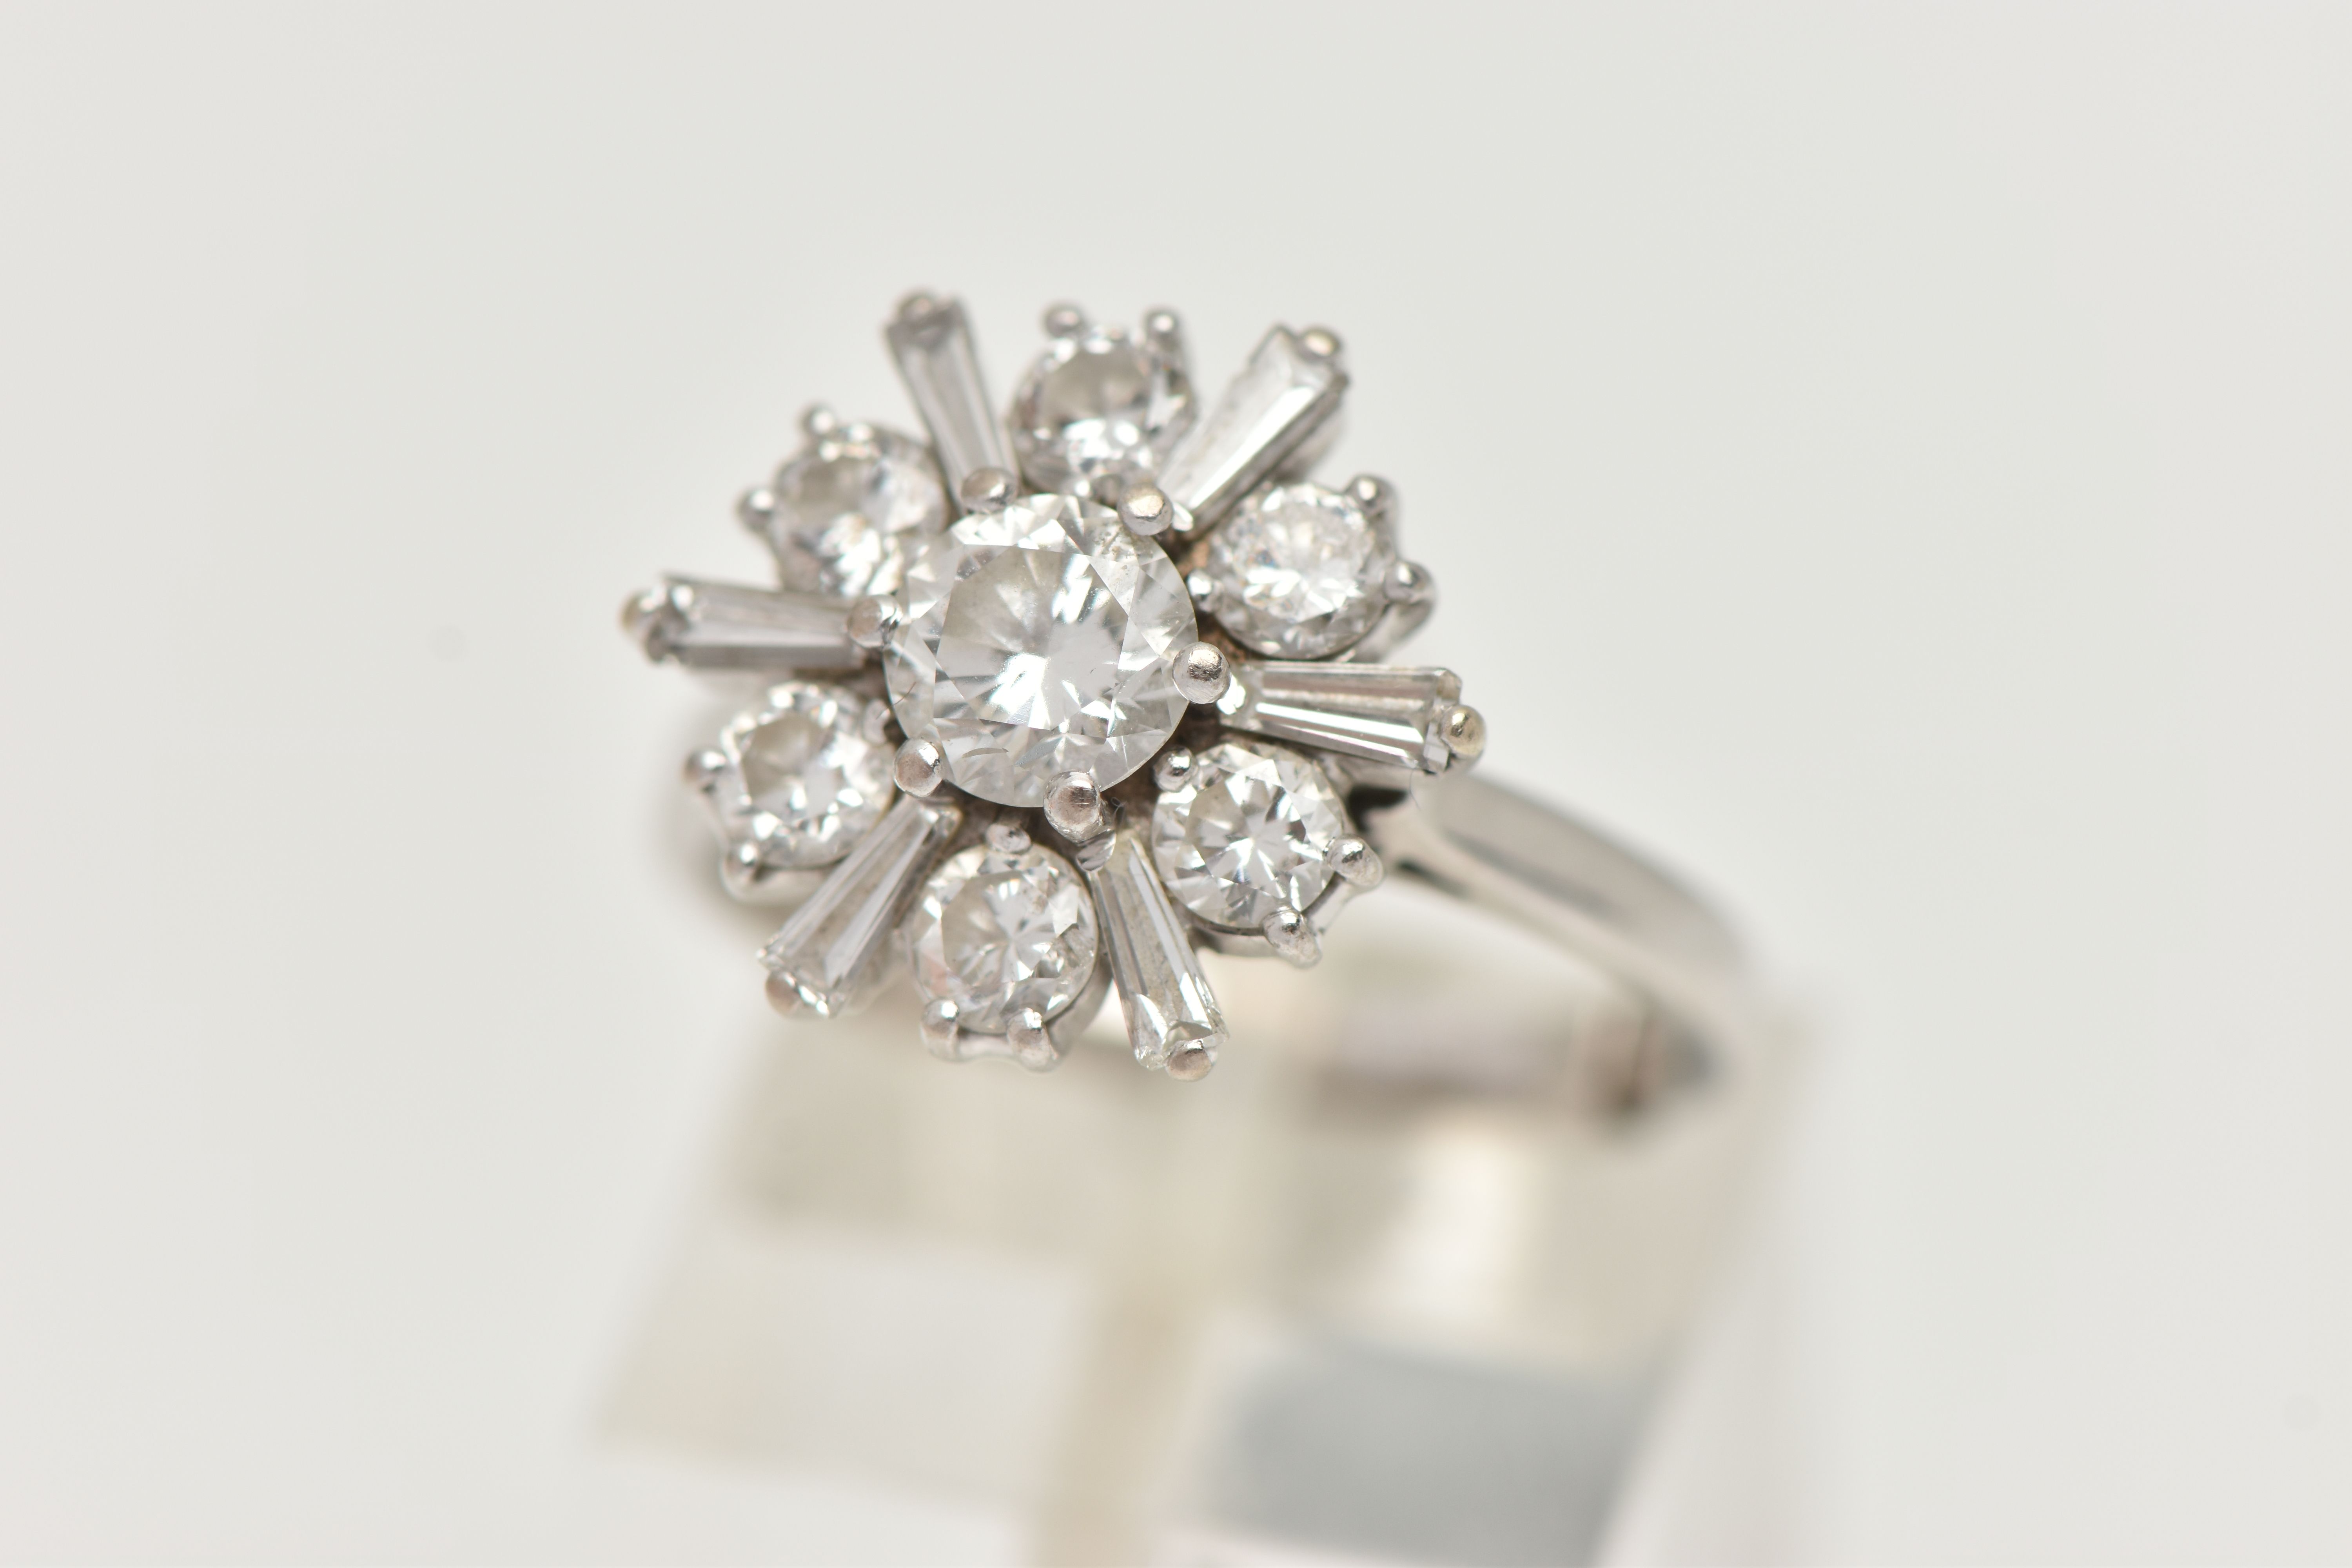 AN 18CT WHITE GOLD DIAMOND CLUSTER RING, centering on a round brilliant cut diamond, estimated